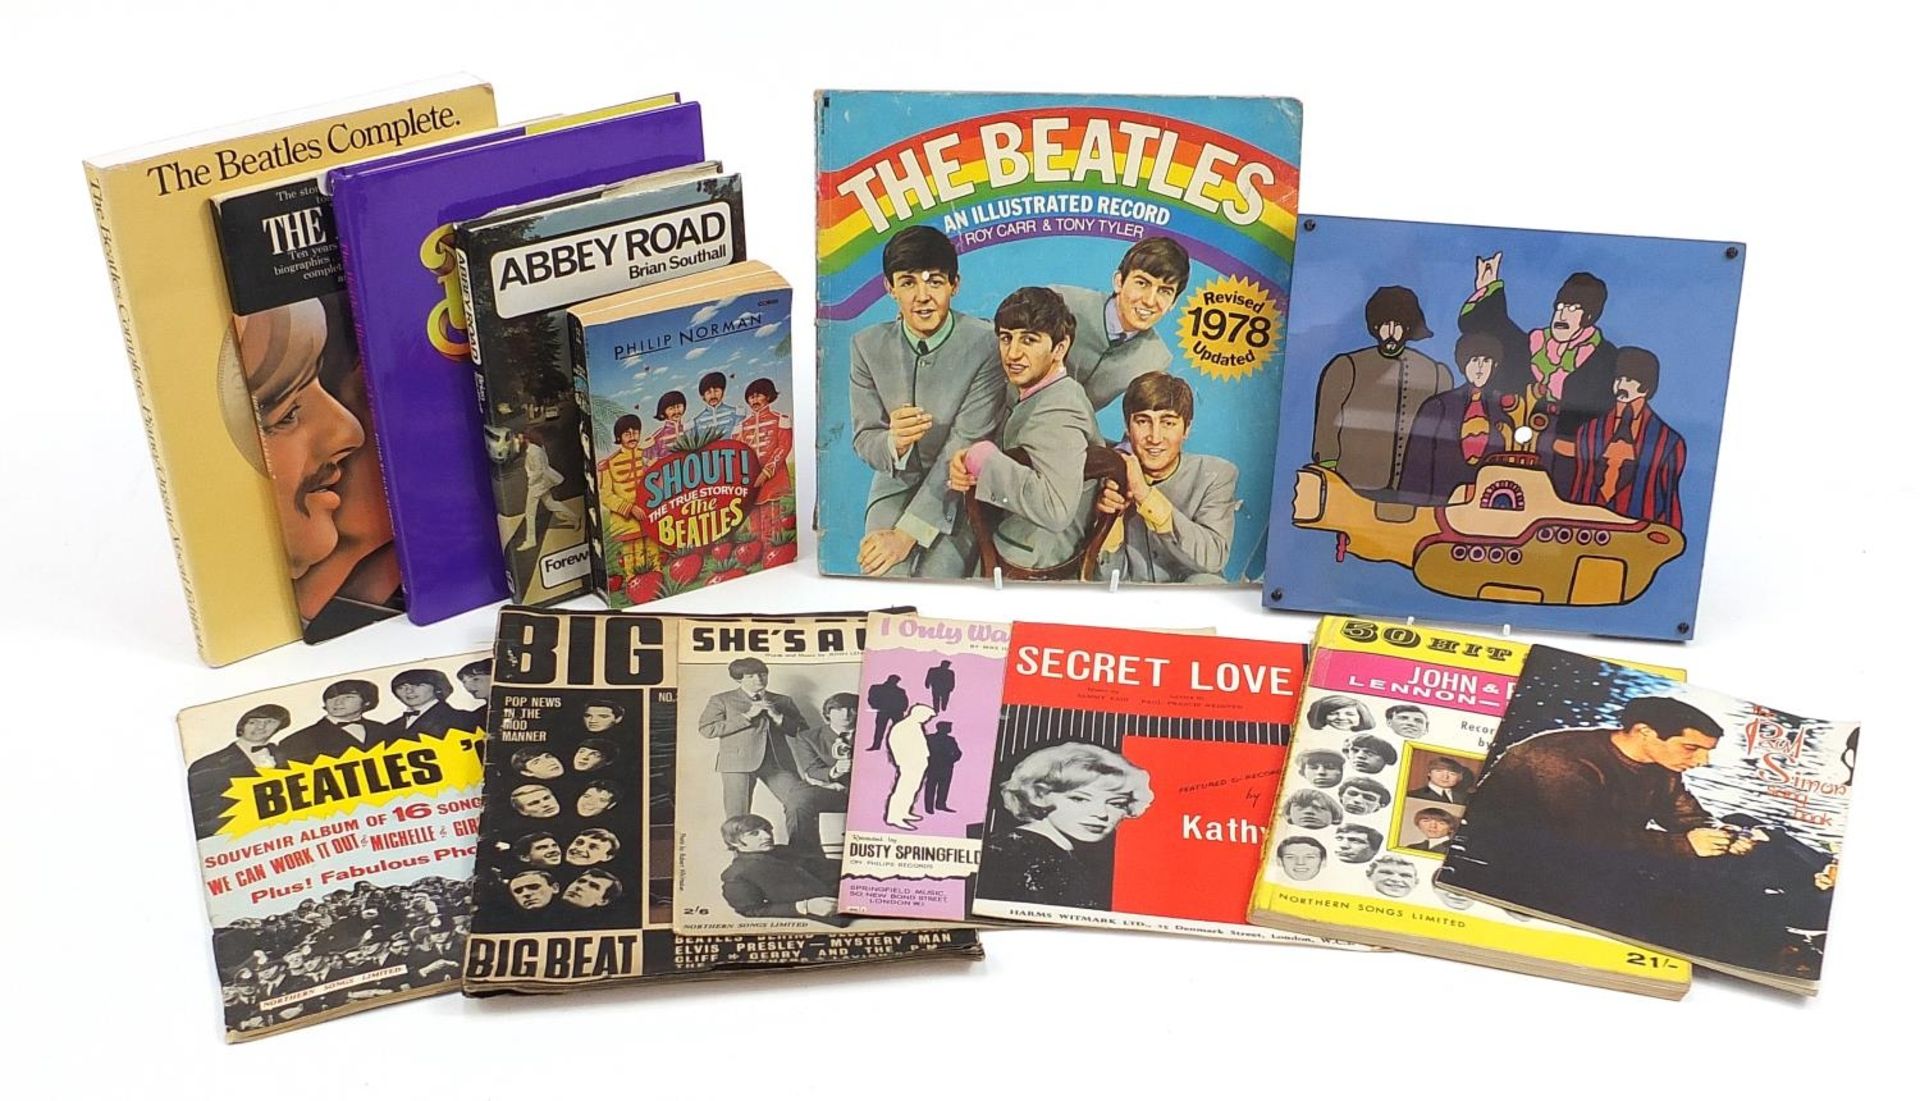 The Beatles related ephemera and a hand painted wooden plaque including The Beatles Complete